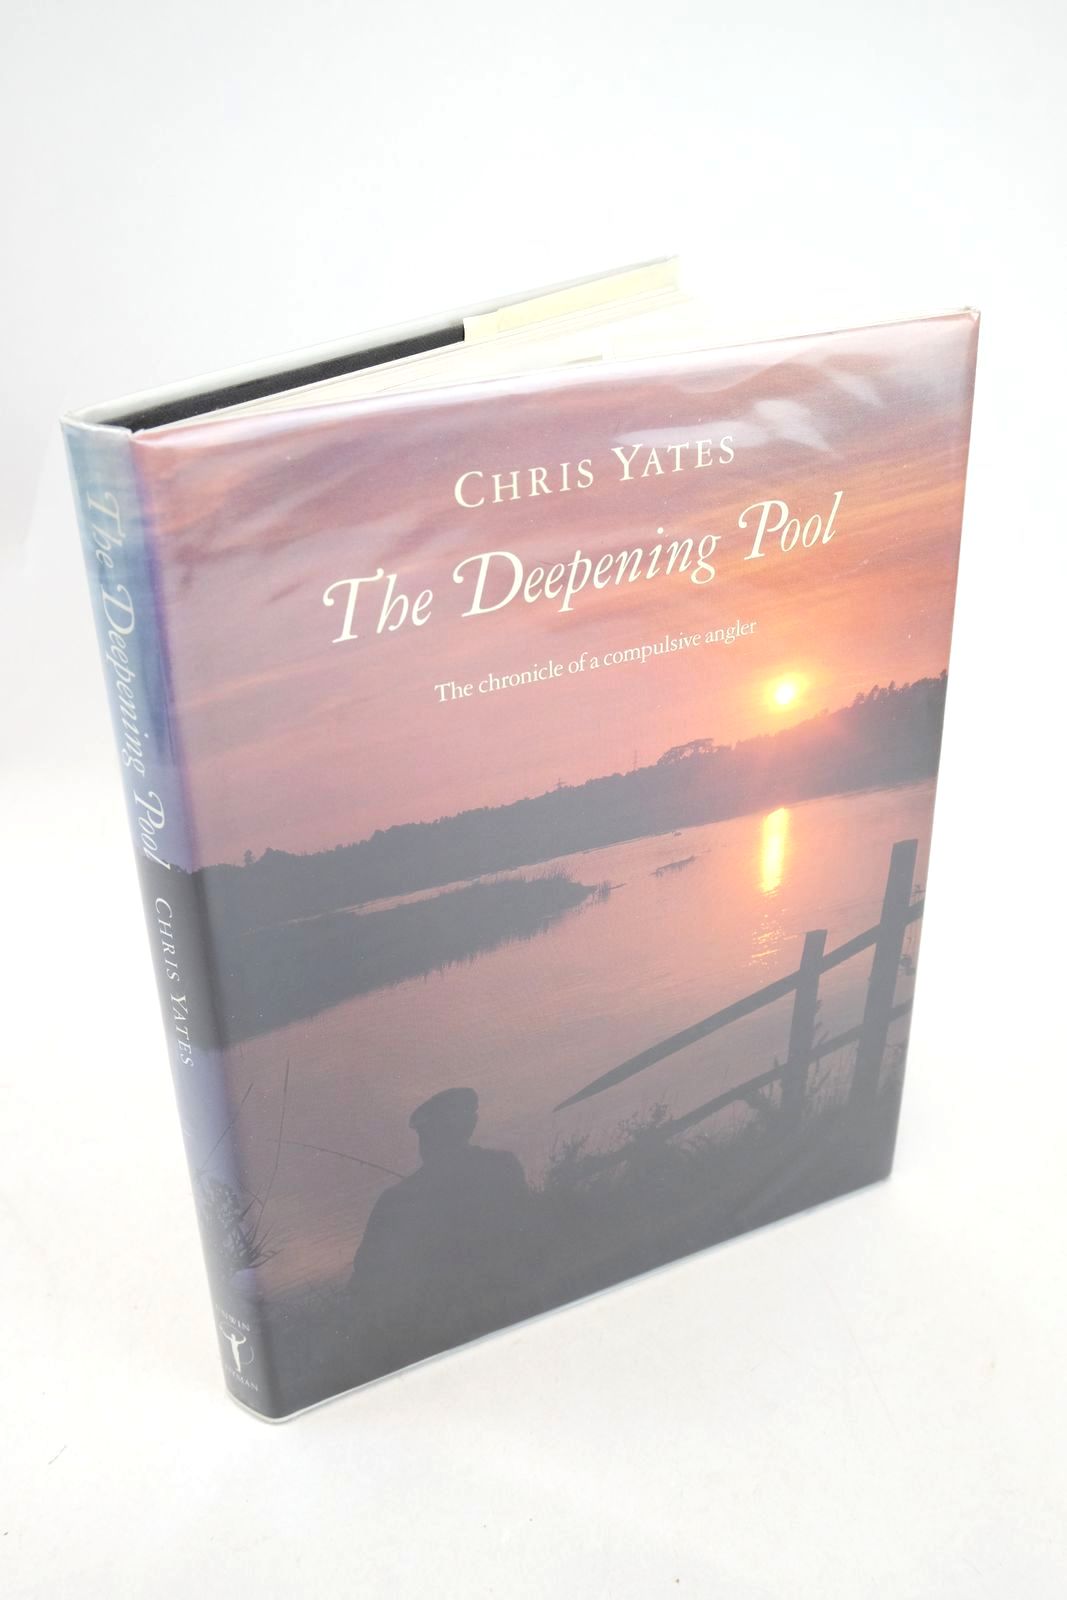 Photo of THE DEEPENING POOL written by Yates, Christopher published by Unwin Hyman (STOCK CODE: 1327696)  for sale by Stella & Rose's Books